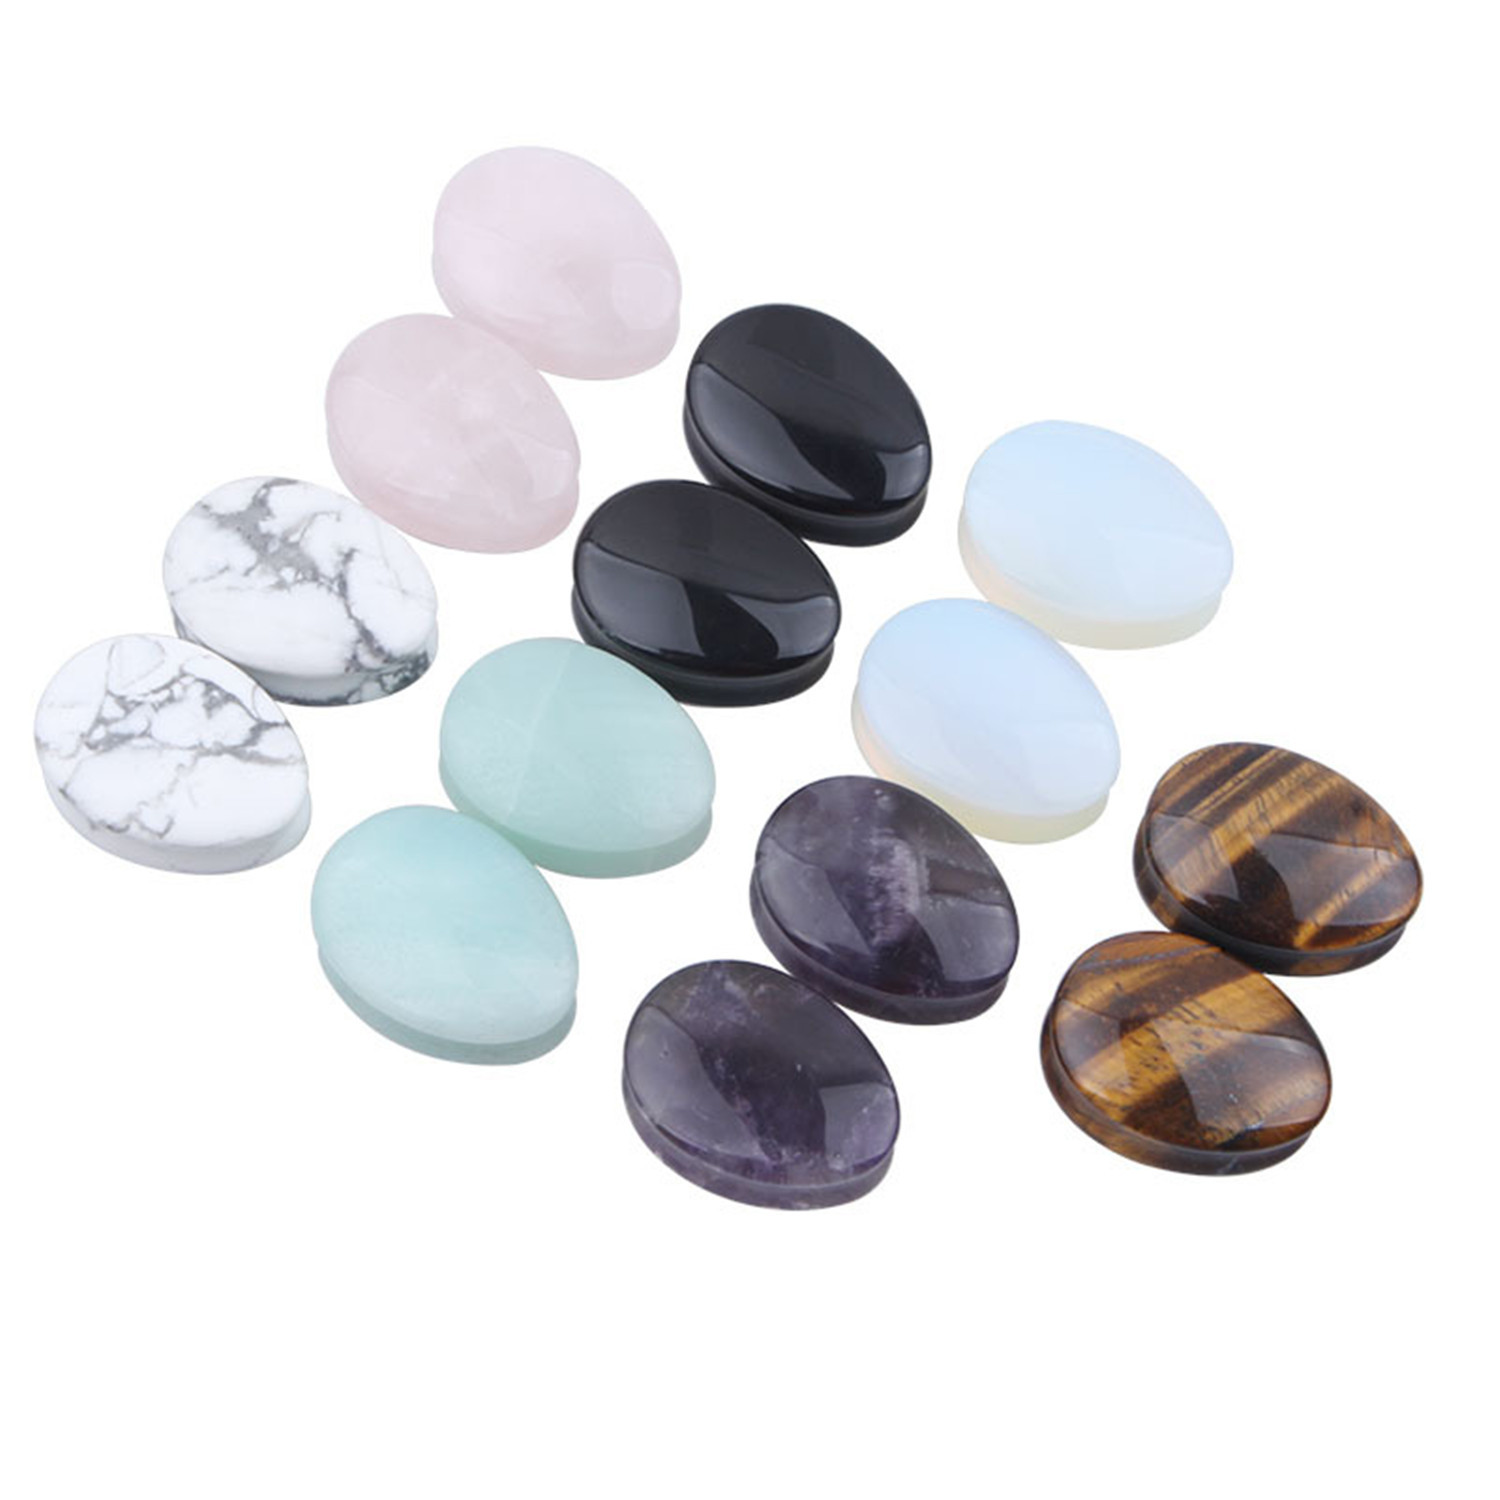 2 Pair of Waterdrop Clear Stone Ear Plugs Assorted Size Double Flared Stretching Expander Piercing 